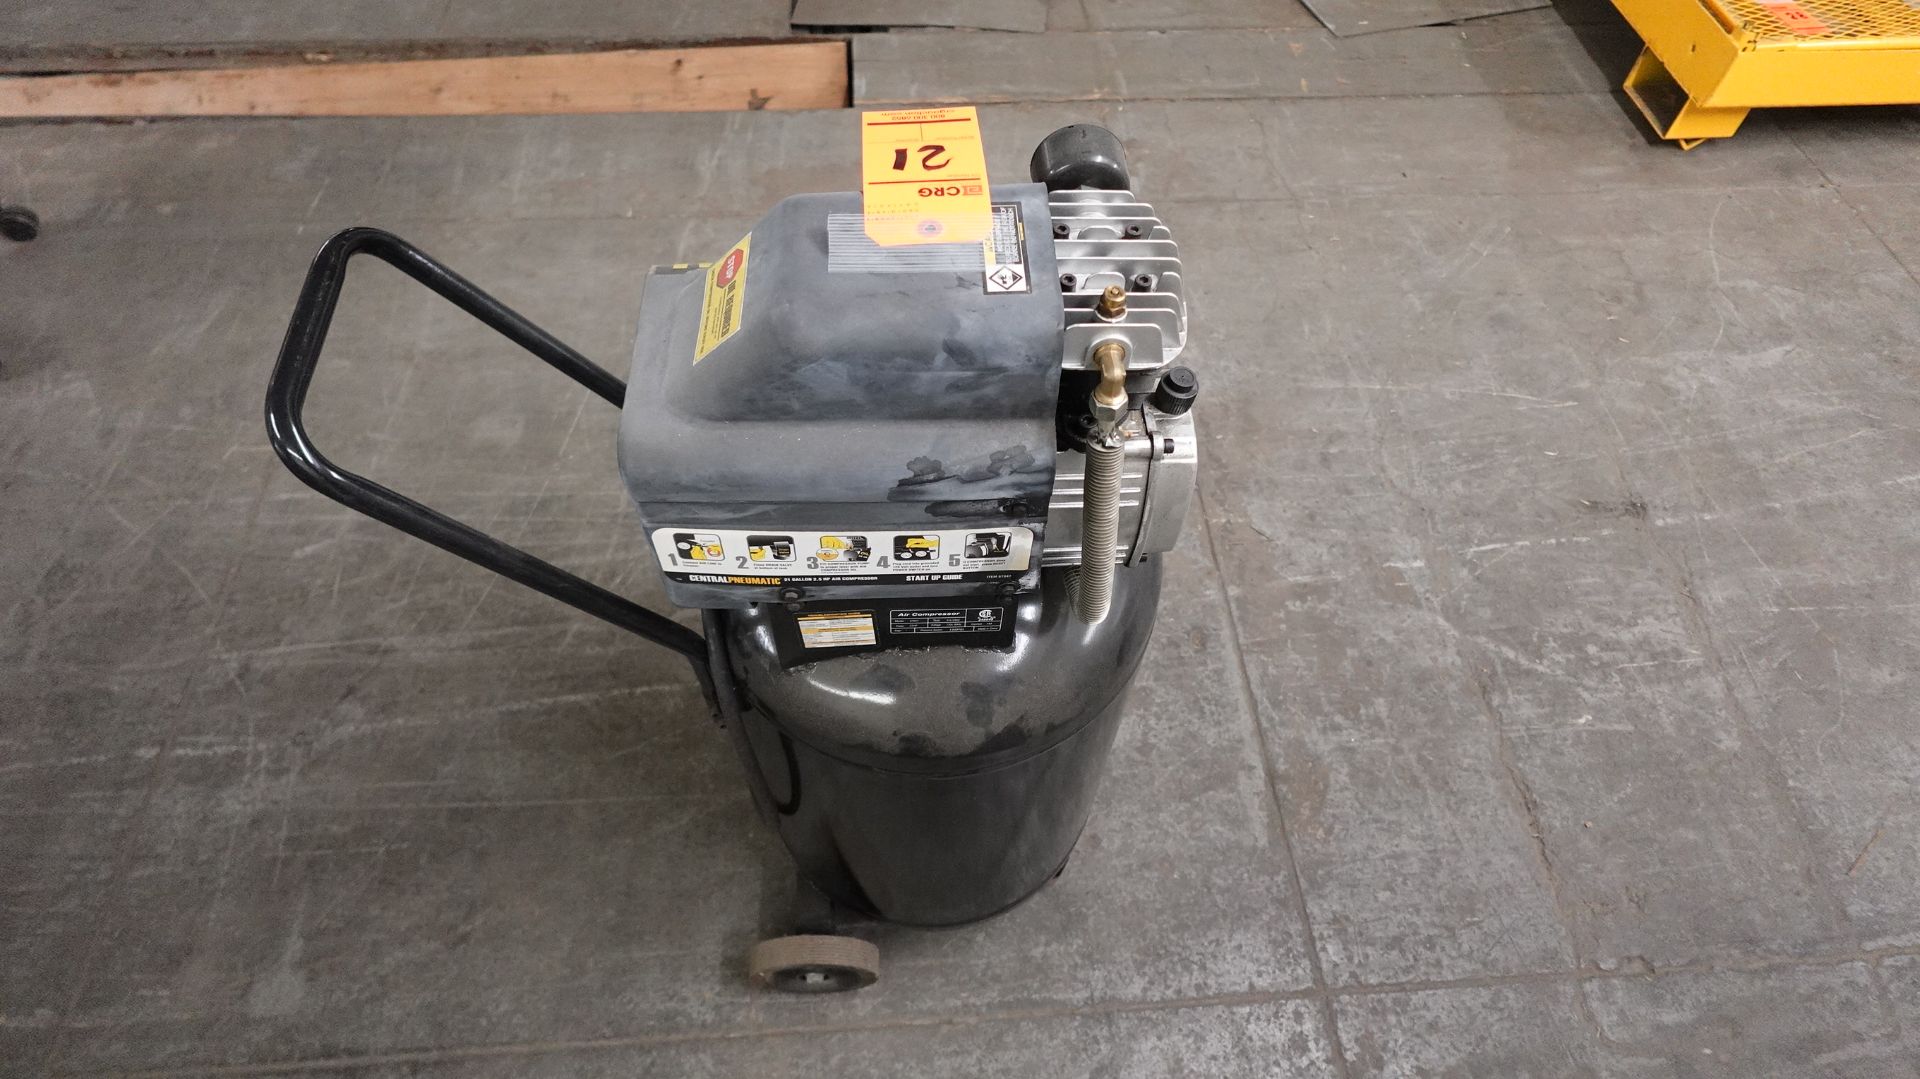 Central Pneumatic air compressor - Image 2 of 3